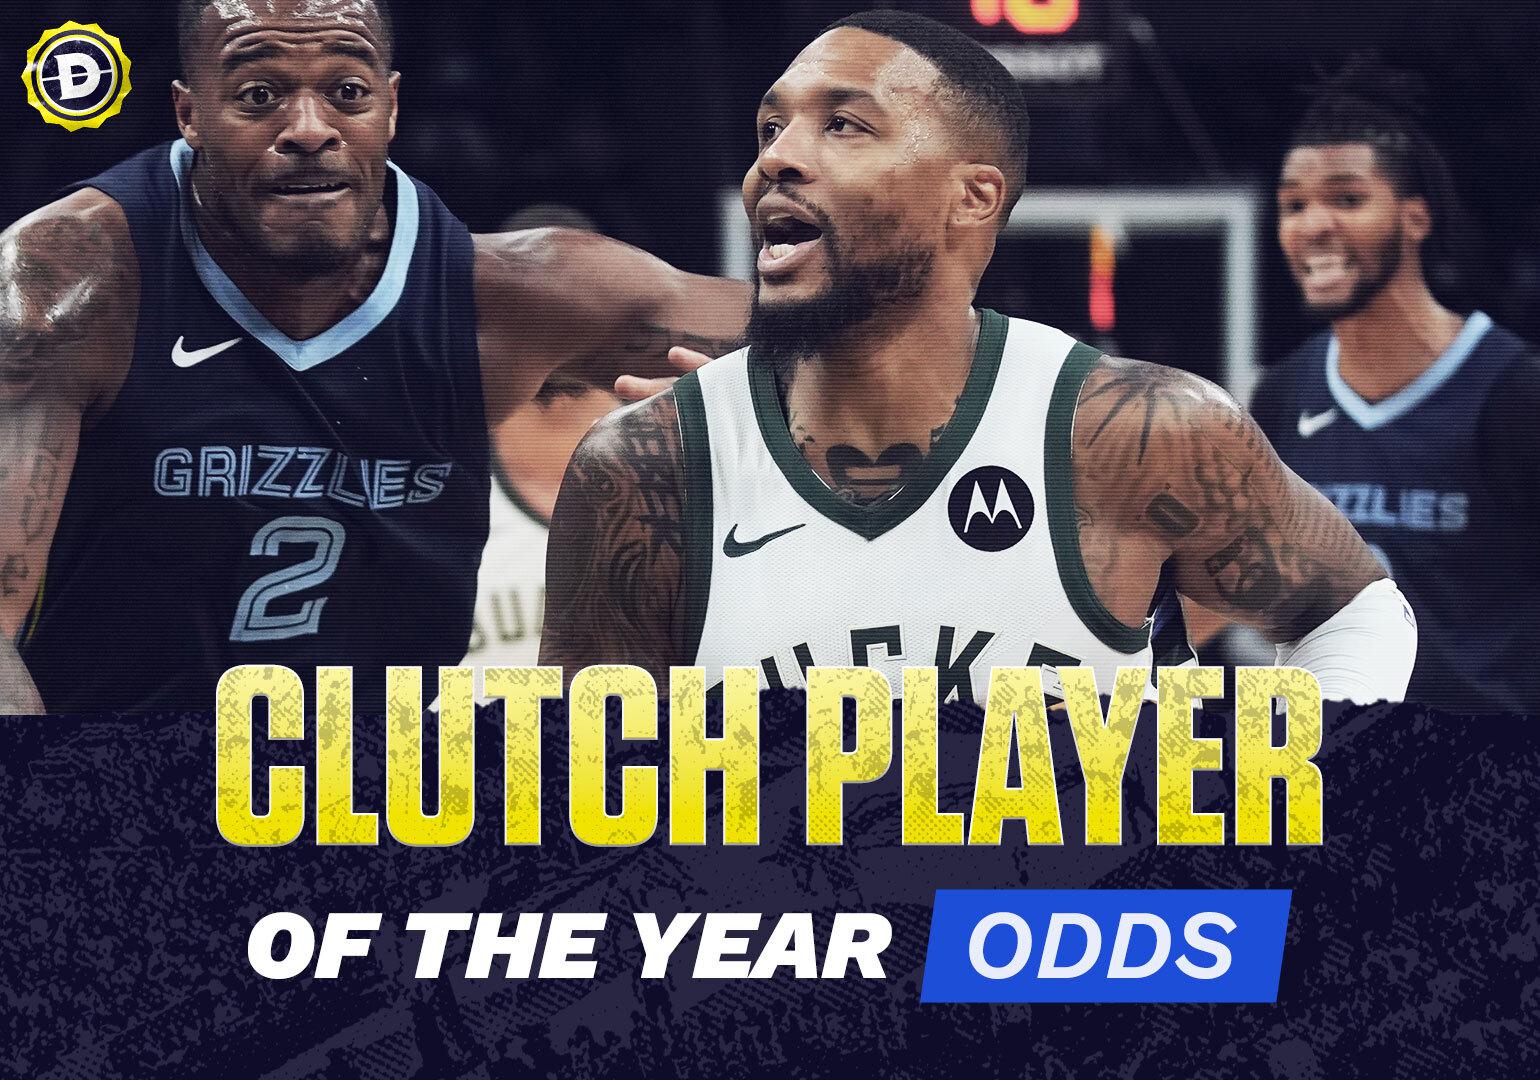 Photo: clutch player of the year odds